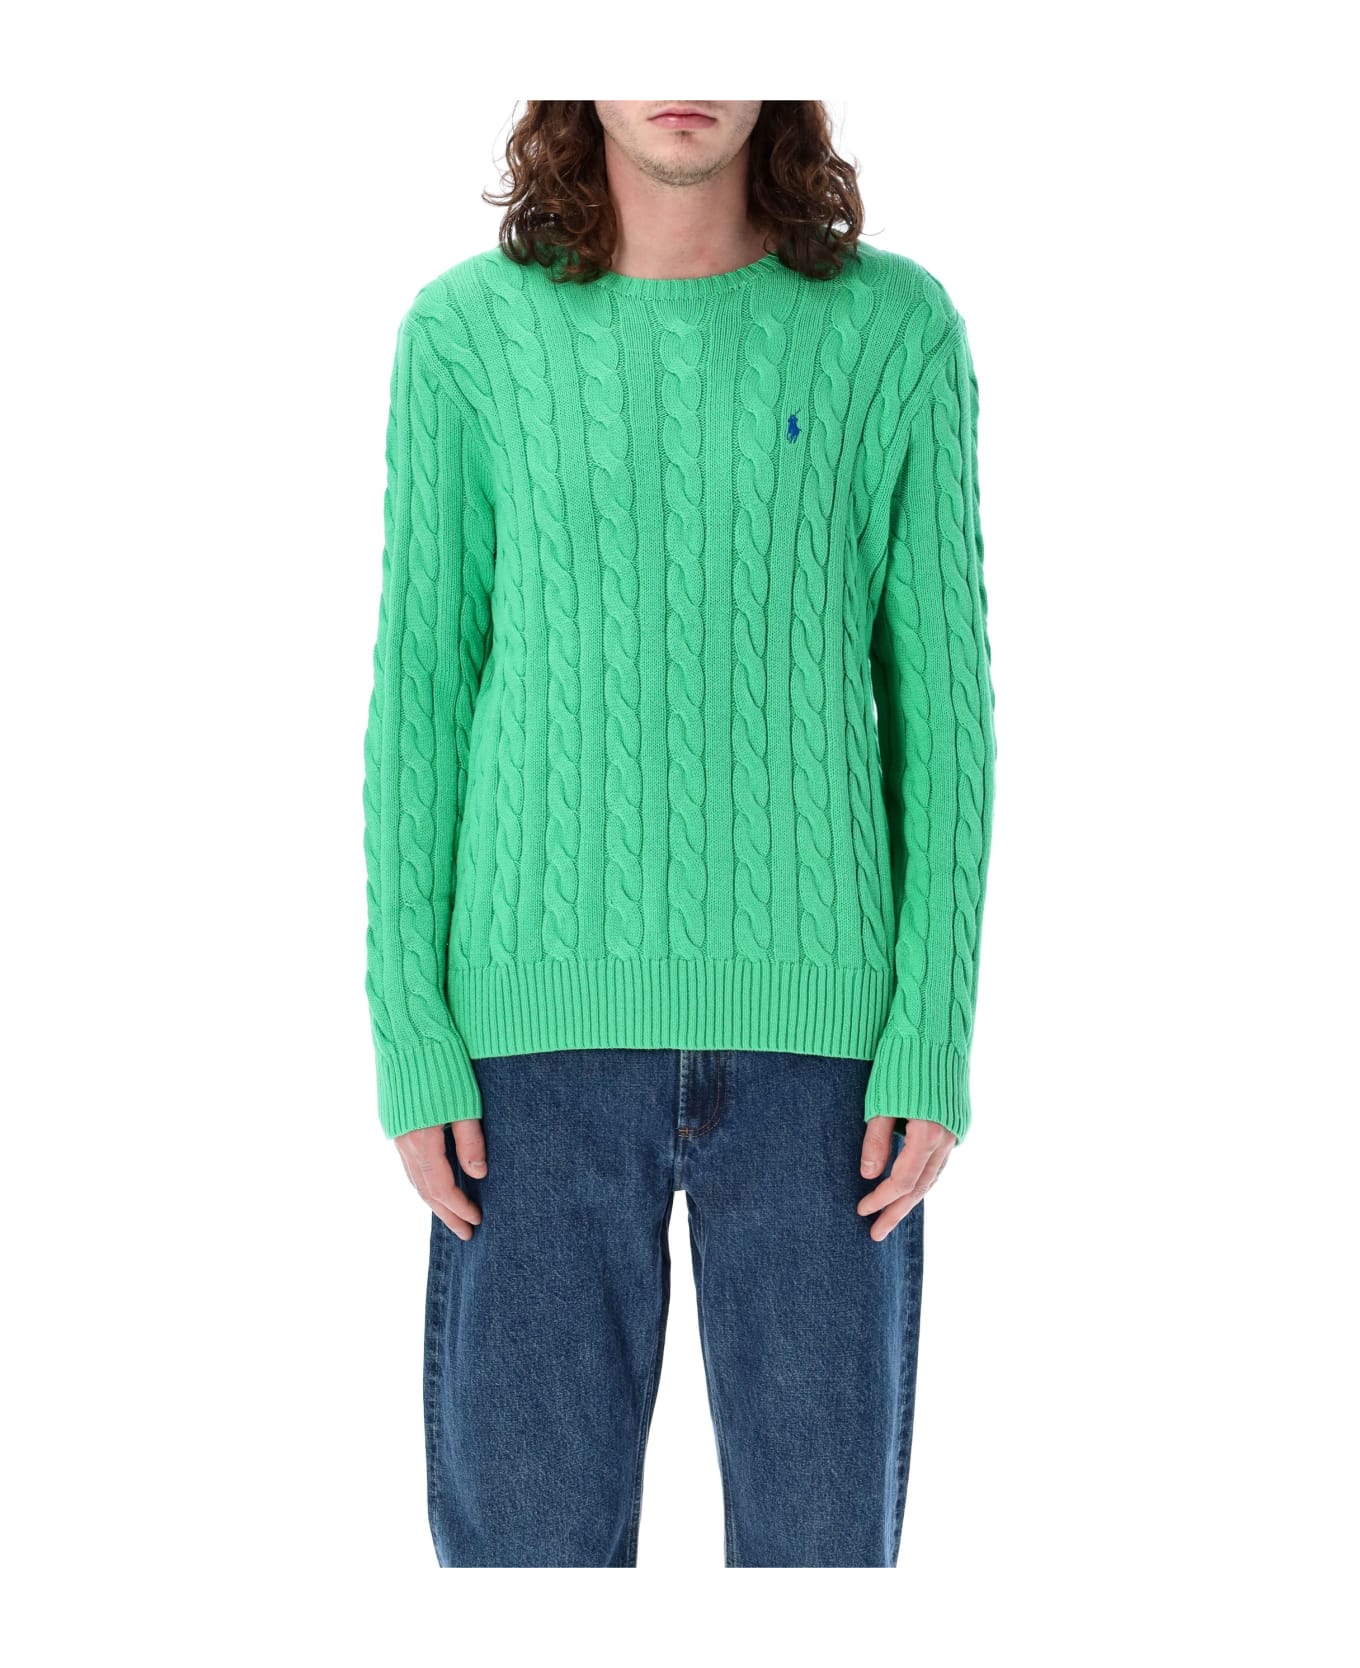 Polo Ralph Lauren Cable Knit Sweater - GREEN ニットウェア